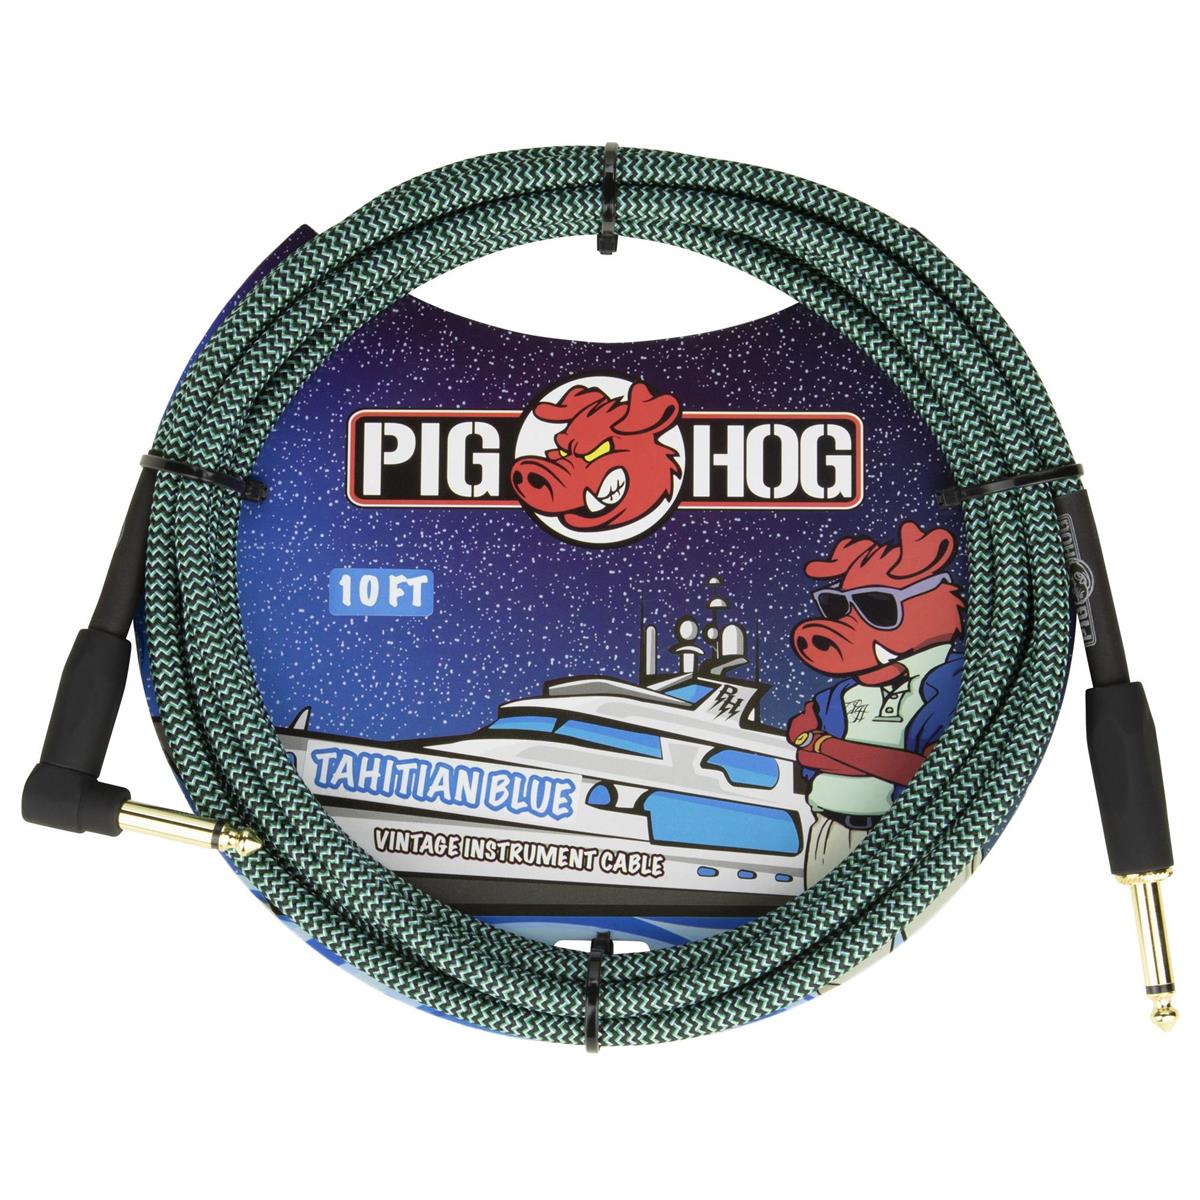 Image of Pig Hog 'Tahitian Blue' Instrument Cable